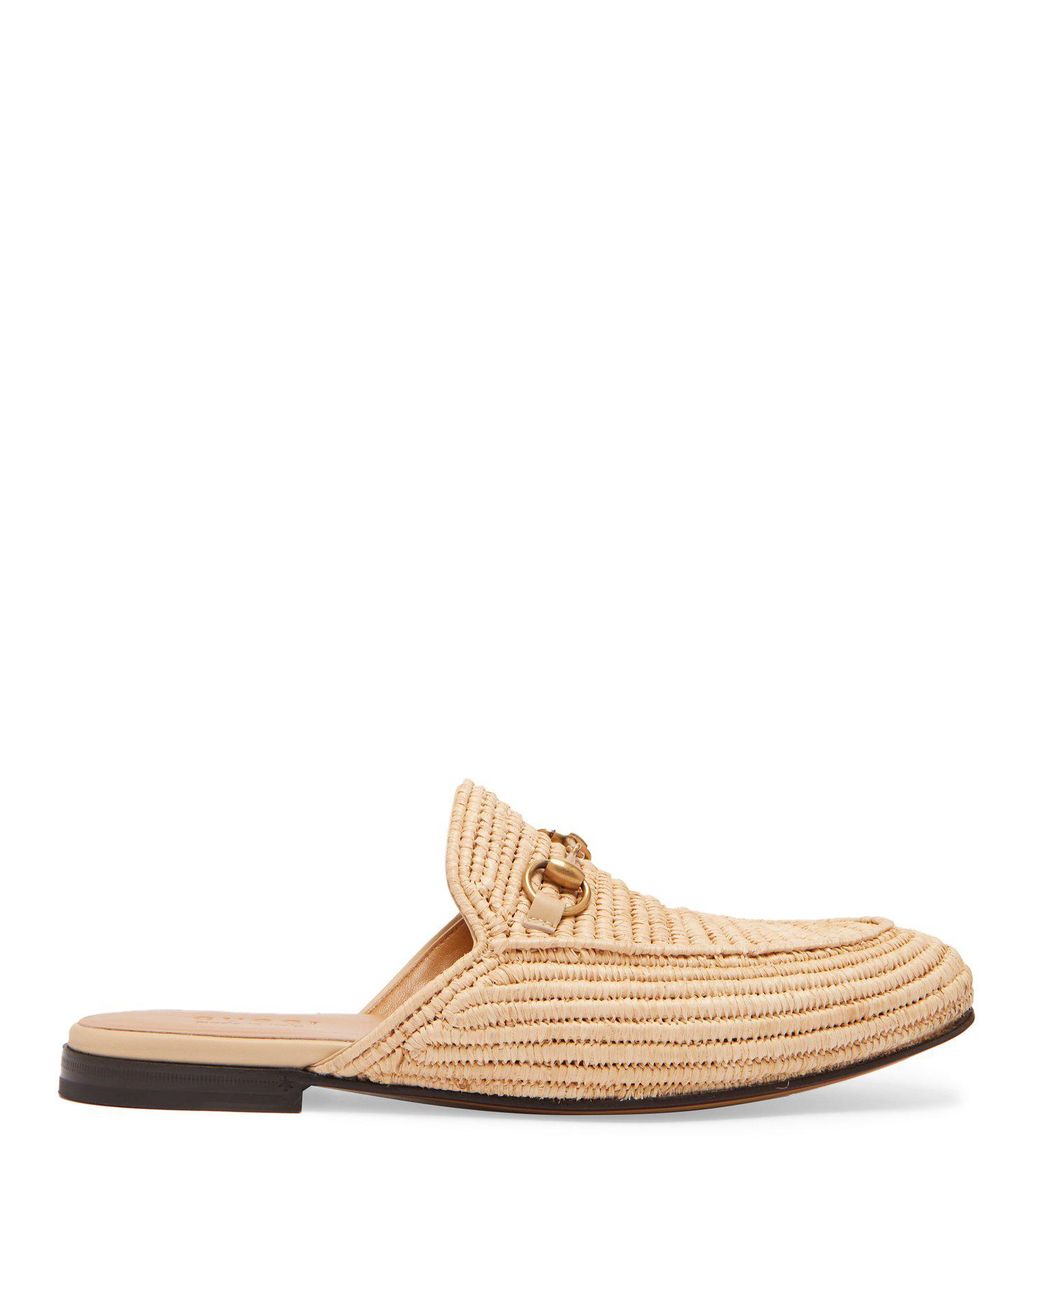 Gucci Leather King Woven Straw Backless Loafers in Light Brown (Brown ...